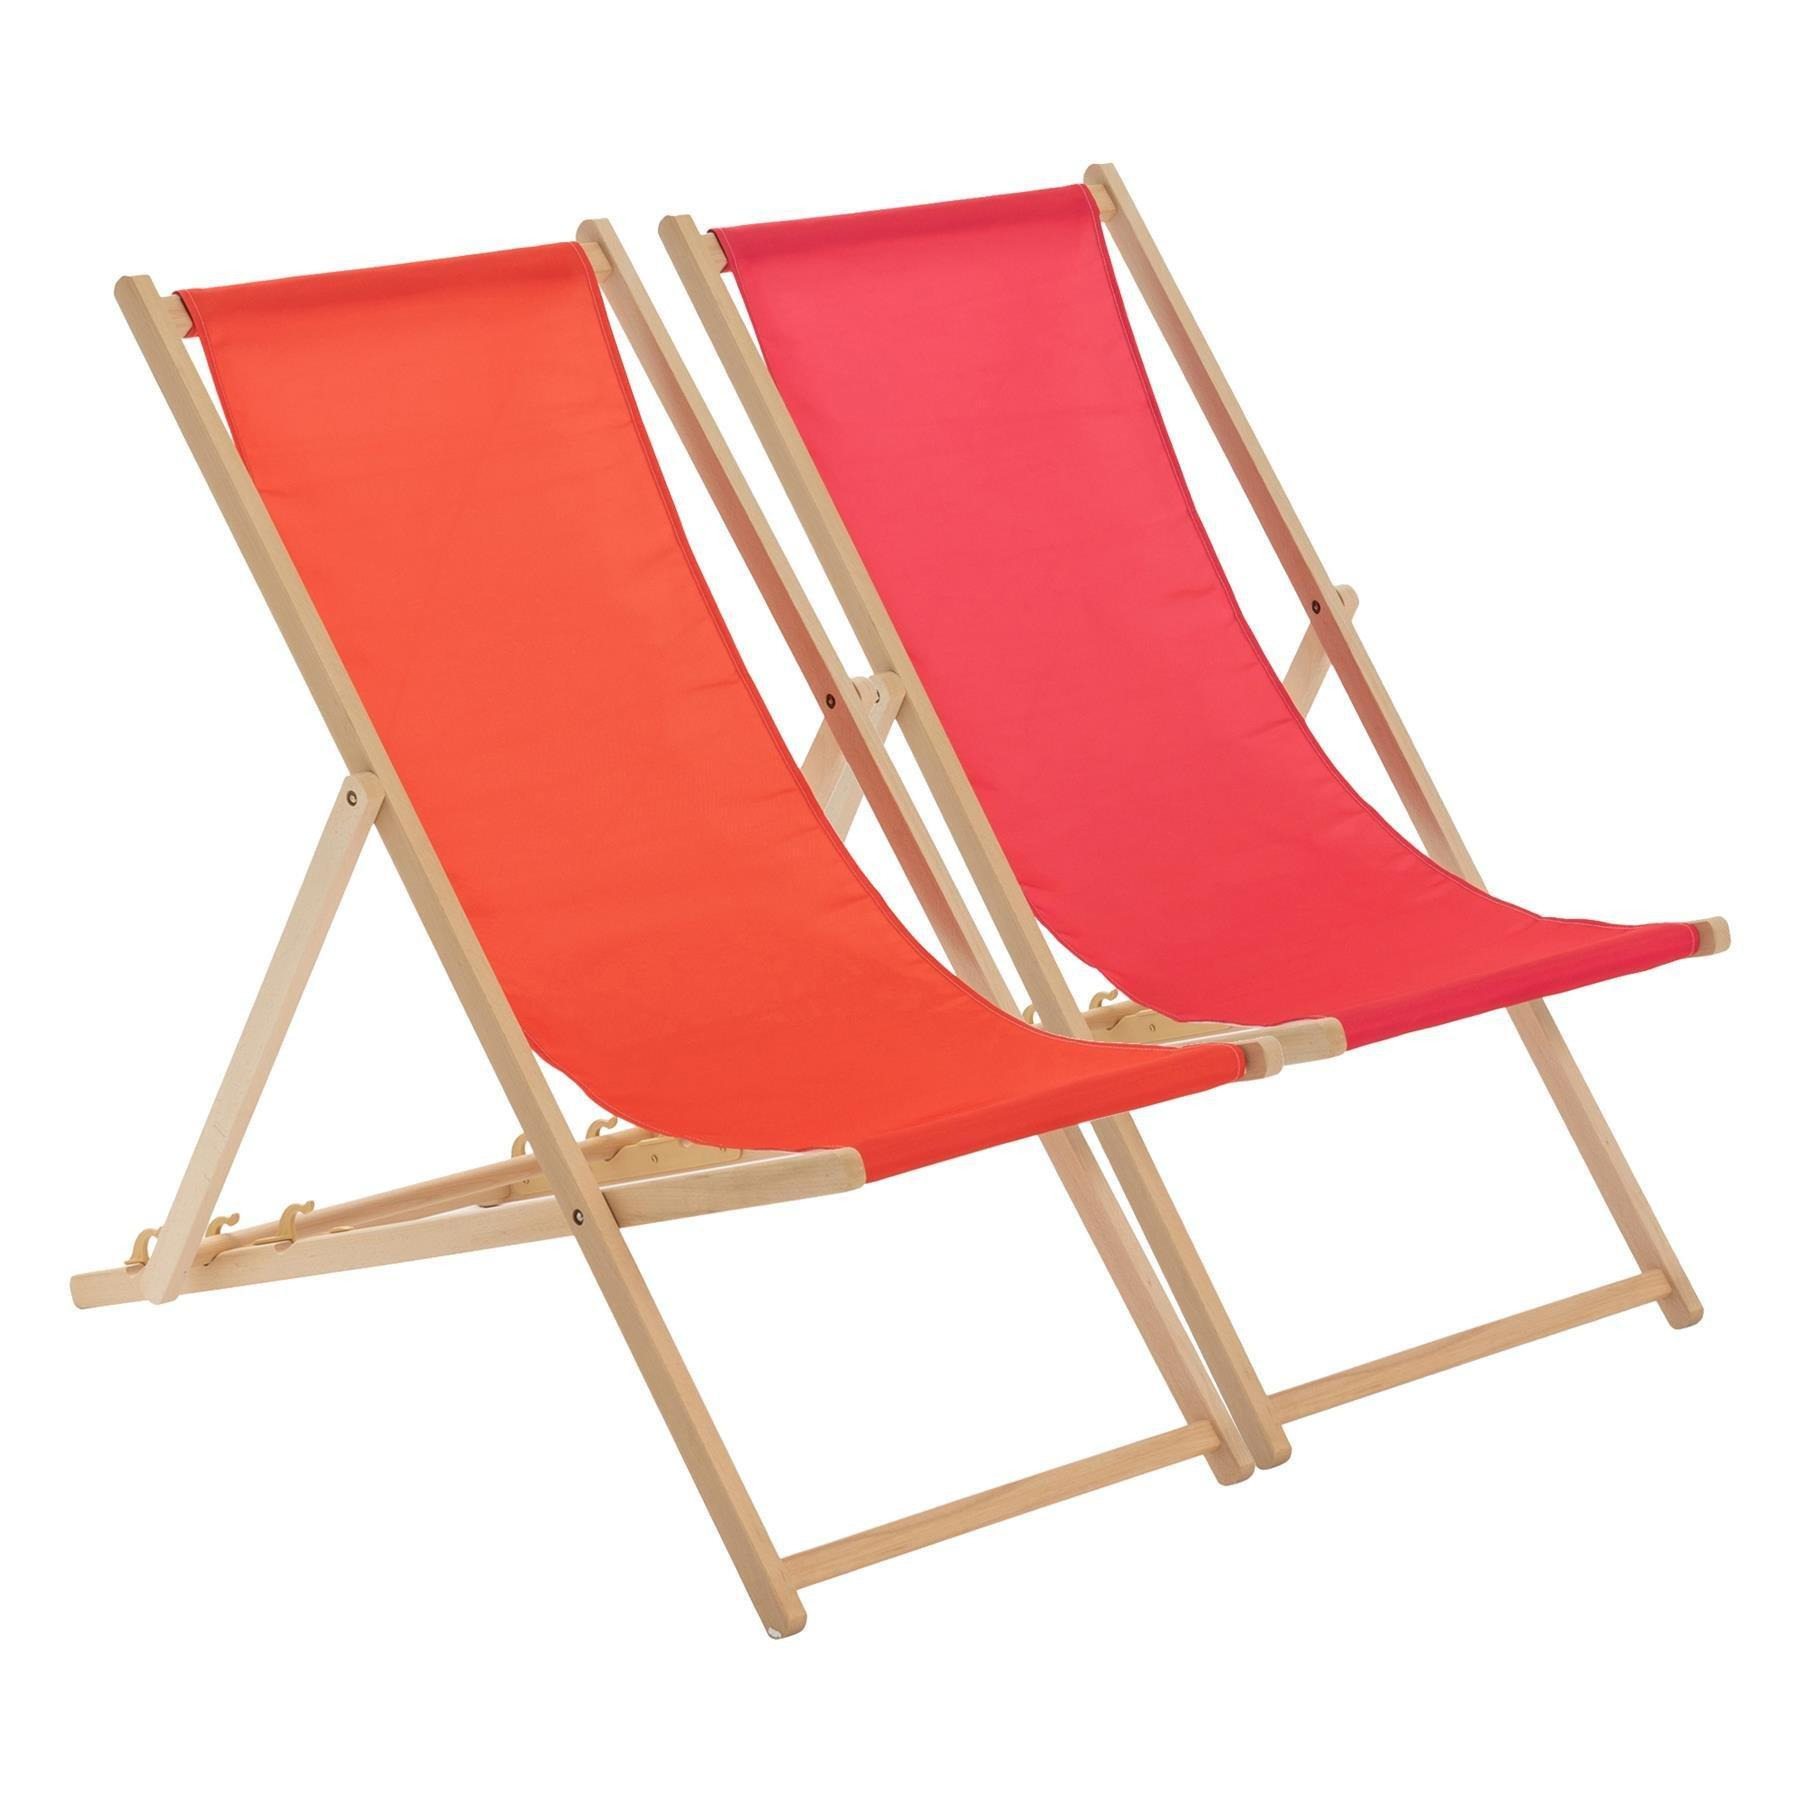 Folding Wooden Deck Chairs Red/Pink Pack of 2 - image 1